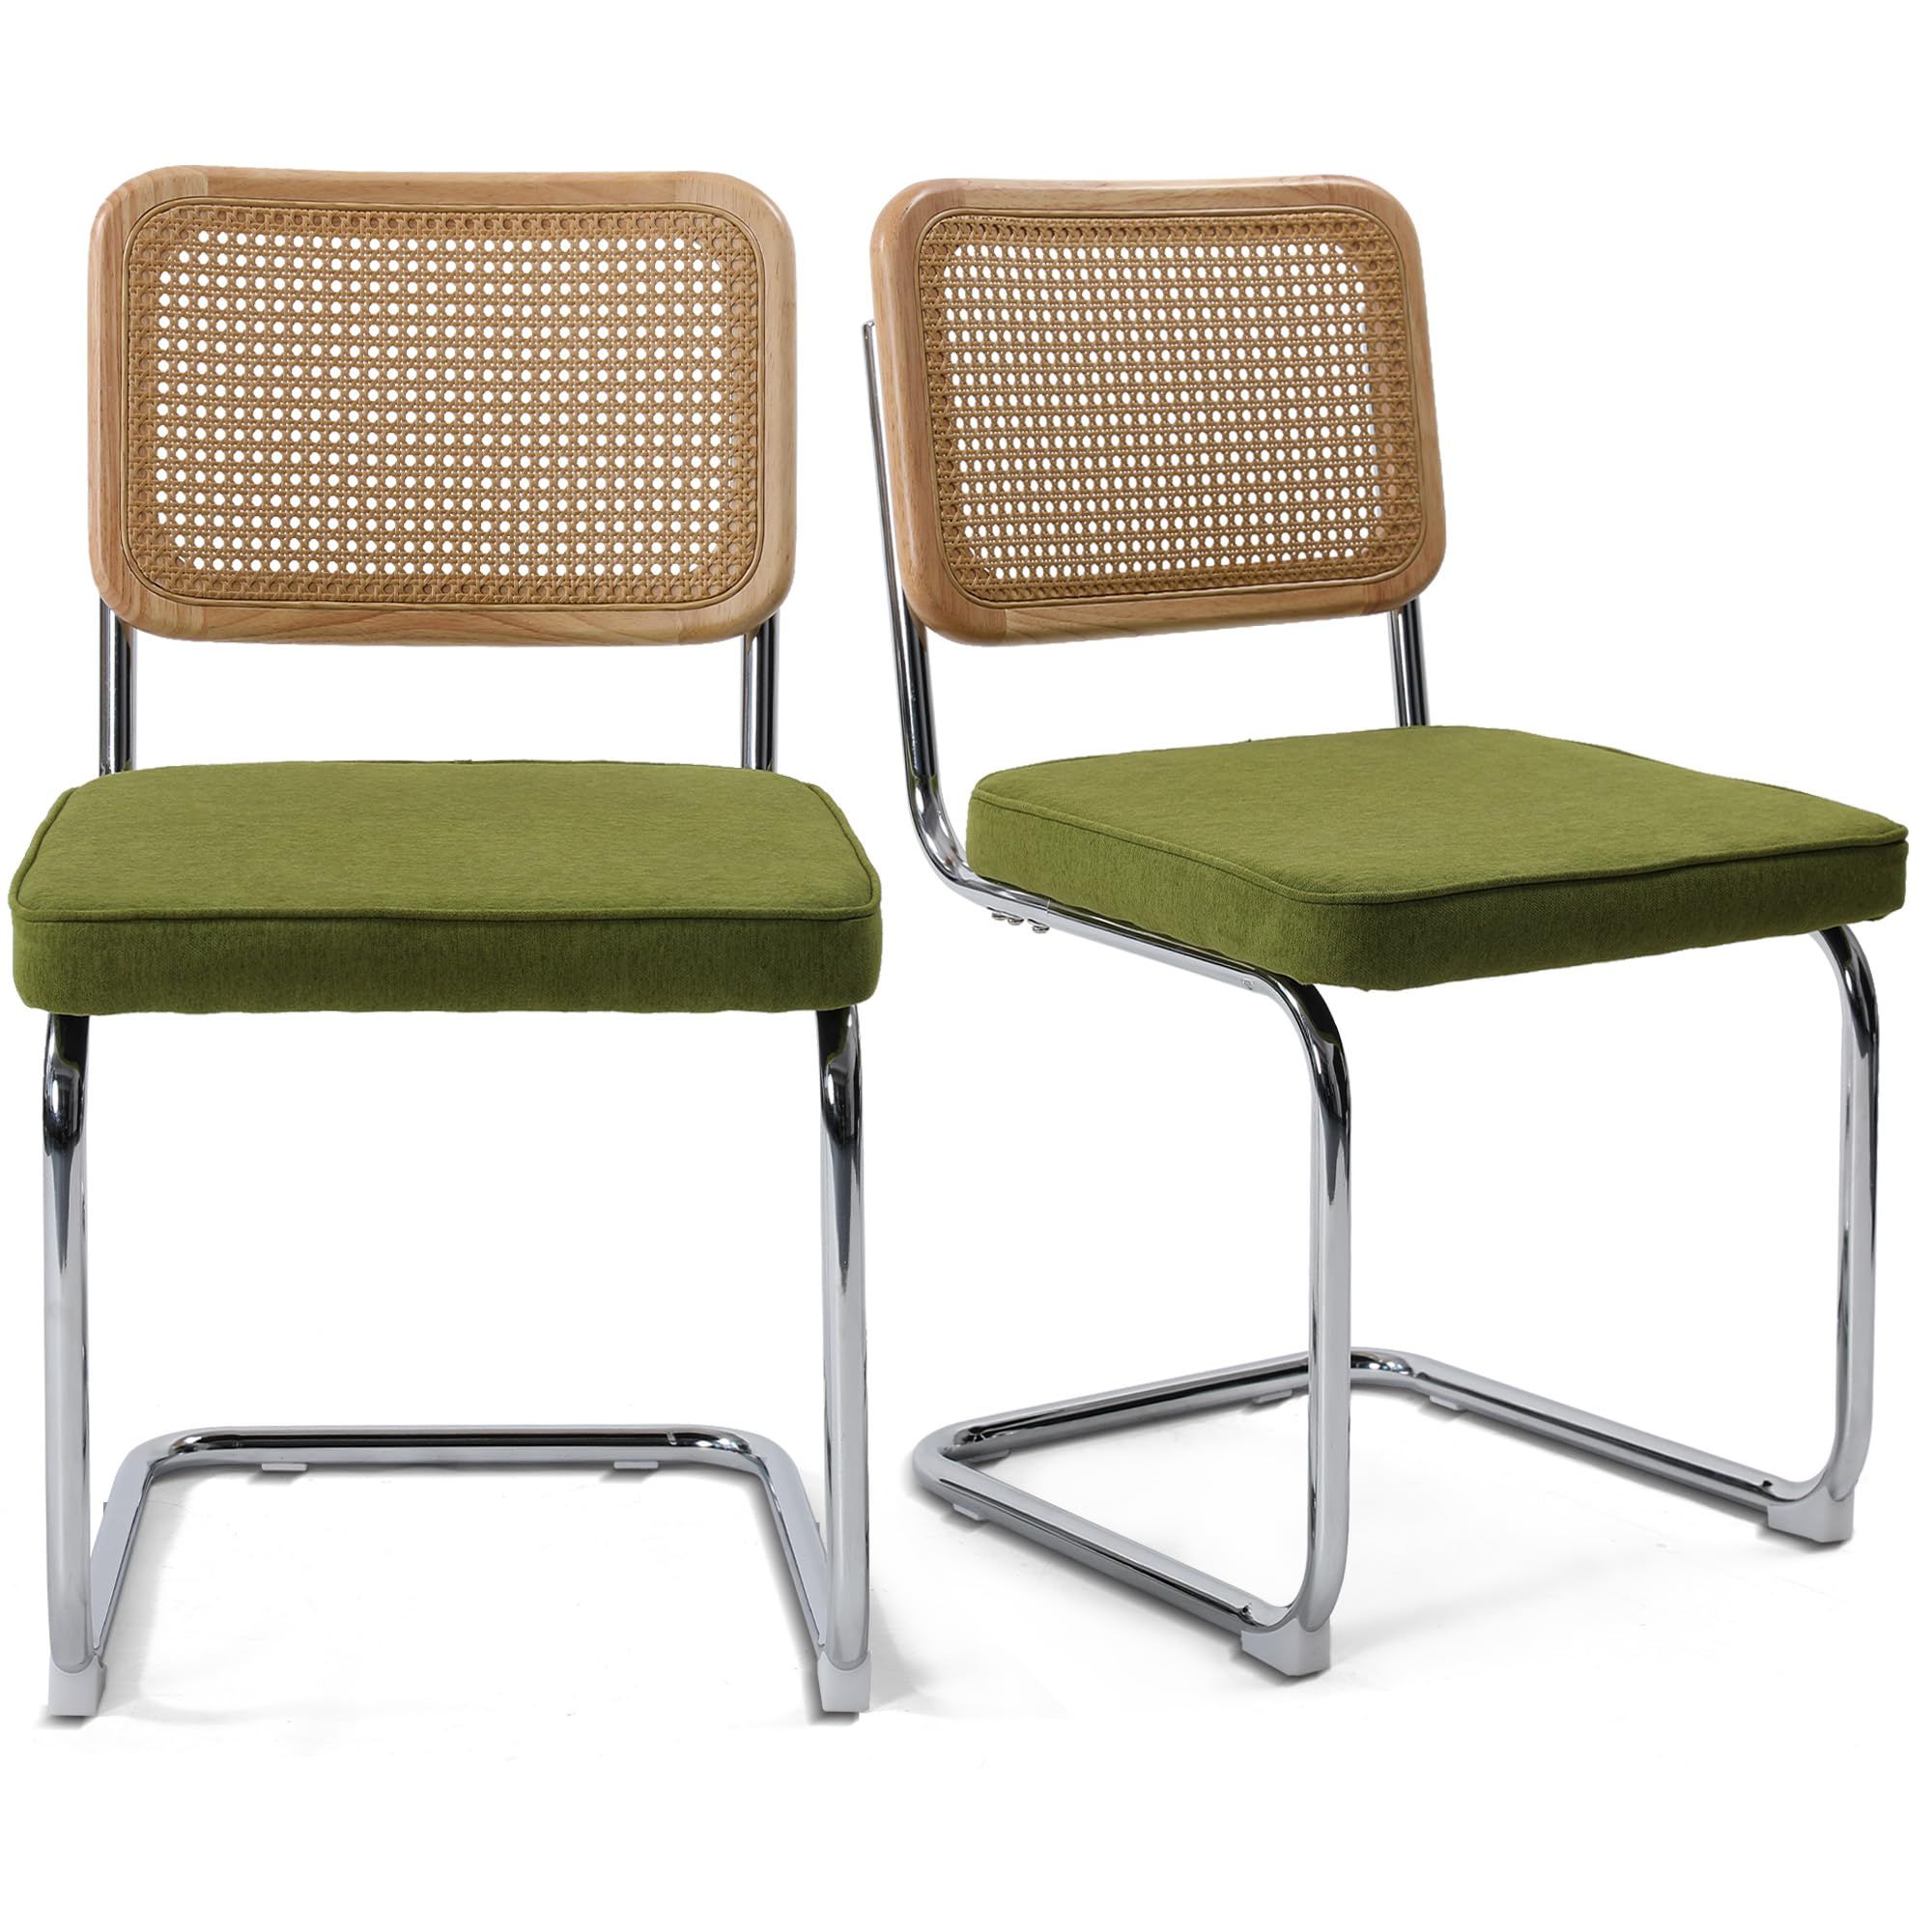 31.5" Modern Cesca Cane Dining Chairs, Set of 2, Handwoven Rattan Cane Back, Chrome Base, Upholstered Cotton Seat, Ideal for Kitchen or Dining Room, Green | Amazon (US)